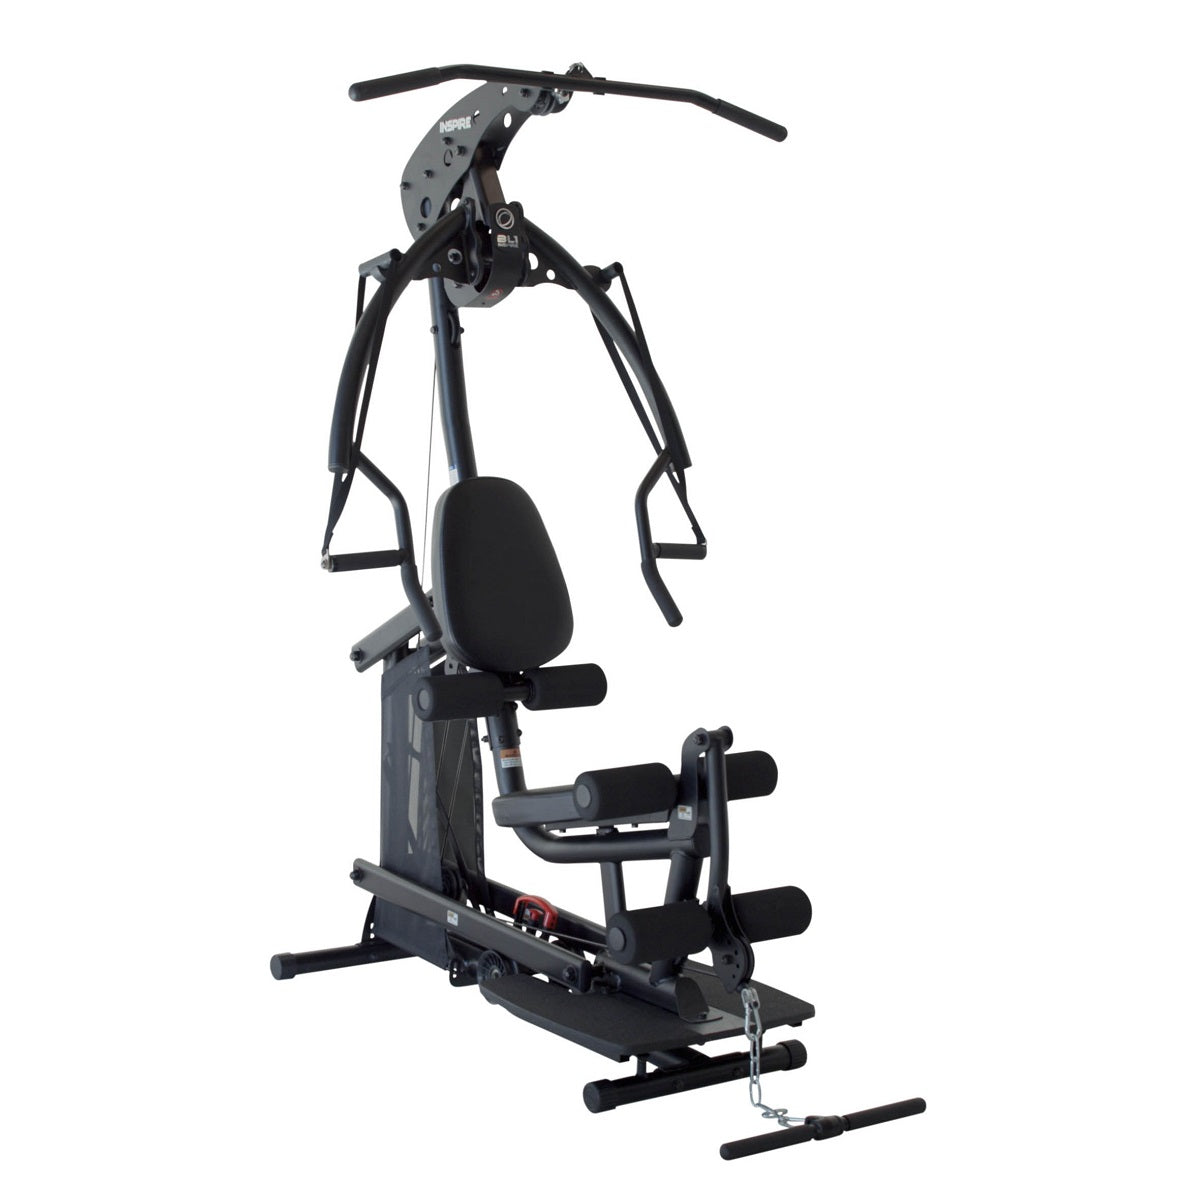 Shop Inspire Fitness Products - Our Fitness Brands - UK Fitness Equipment -  UK Fitness Equipment